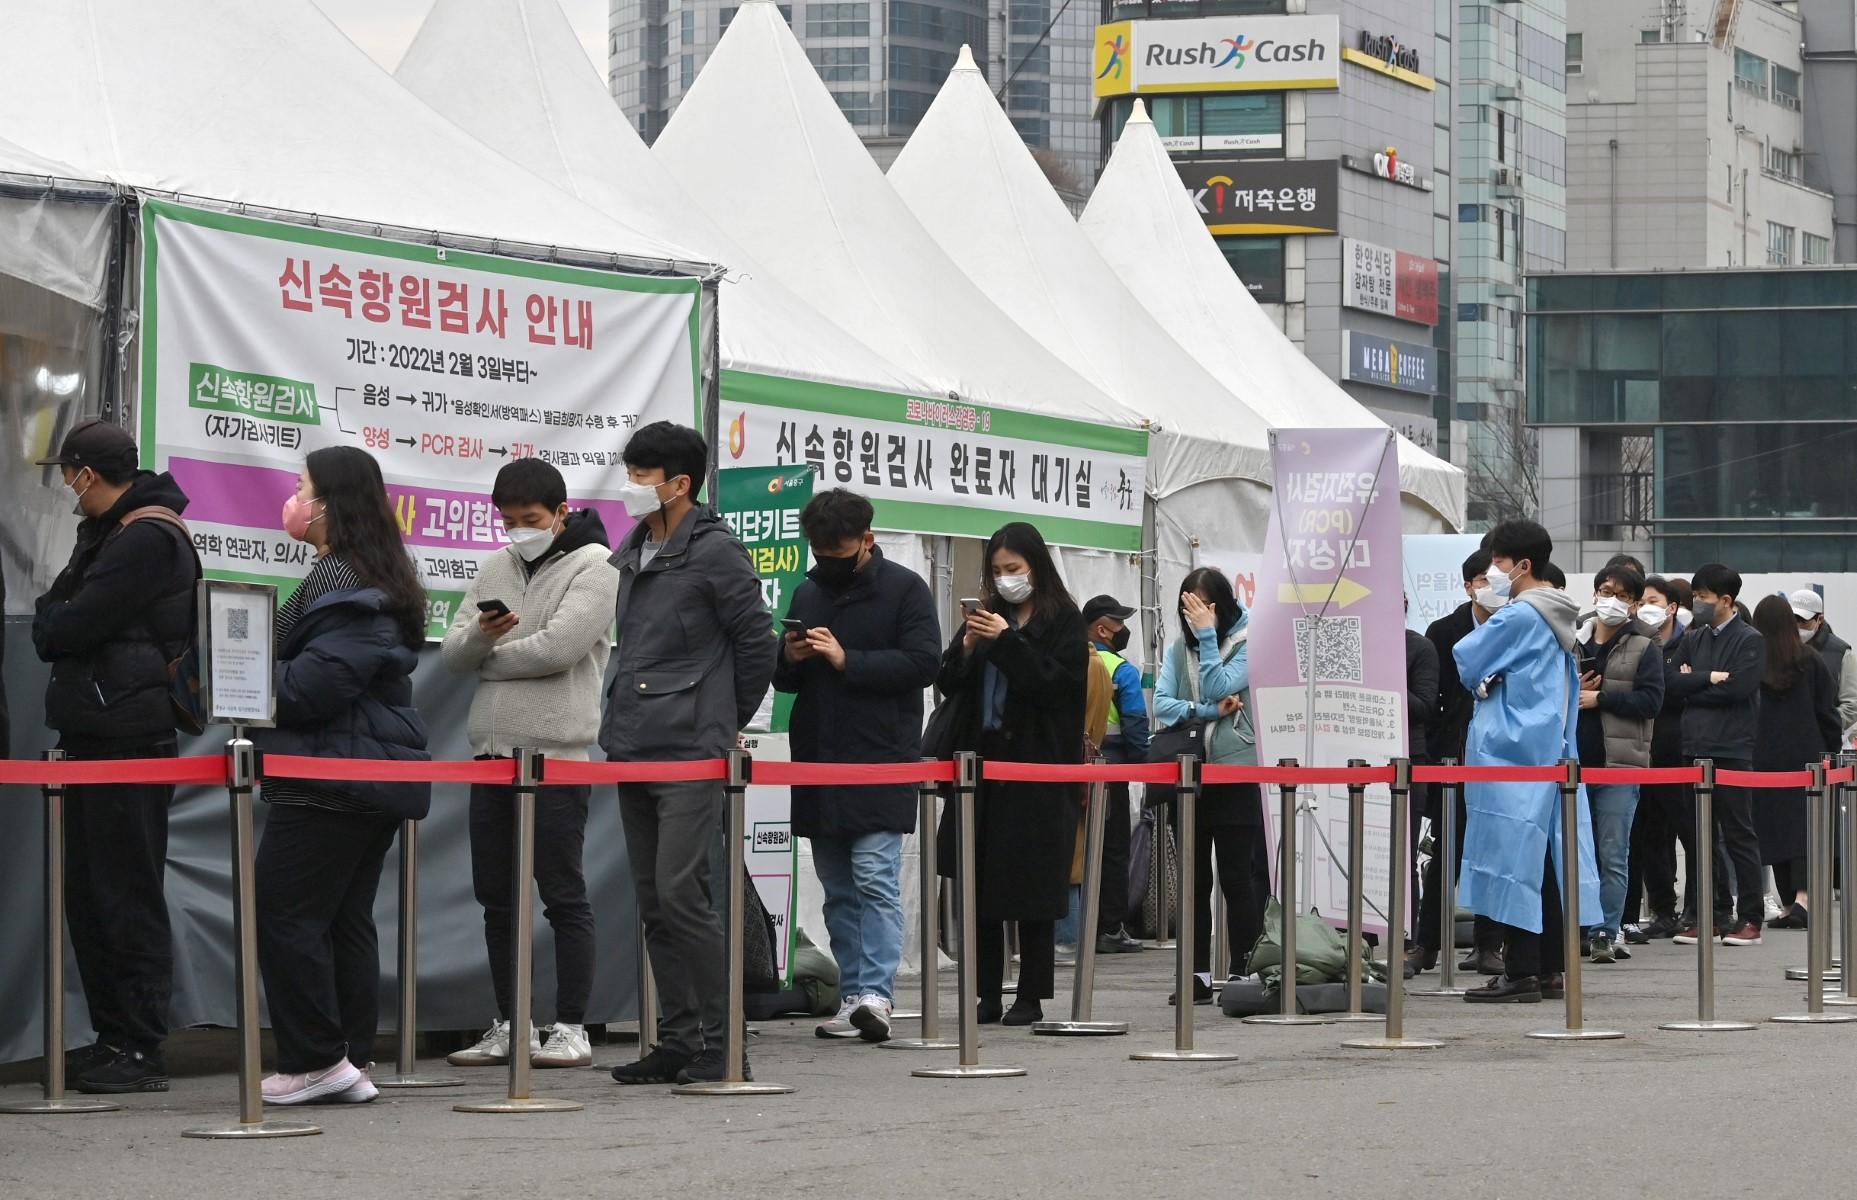 People wait in line to be tested for the Covid-19 coronavirus at a virus testing centre in Seoul on March 17, after South Korea's daily infections rose sharply to hit a new high of over 600,000. Photo: AFP